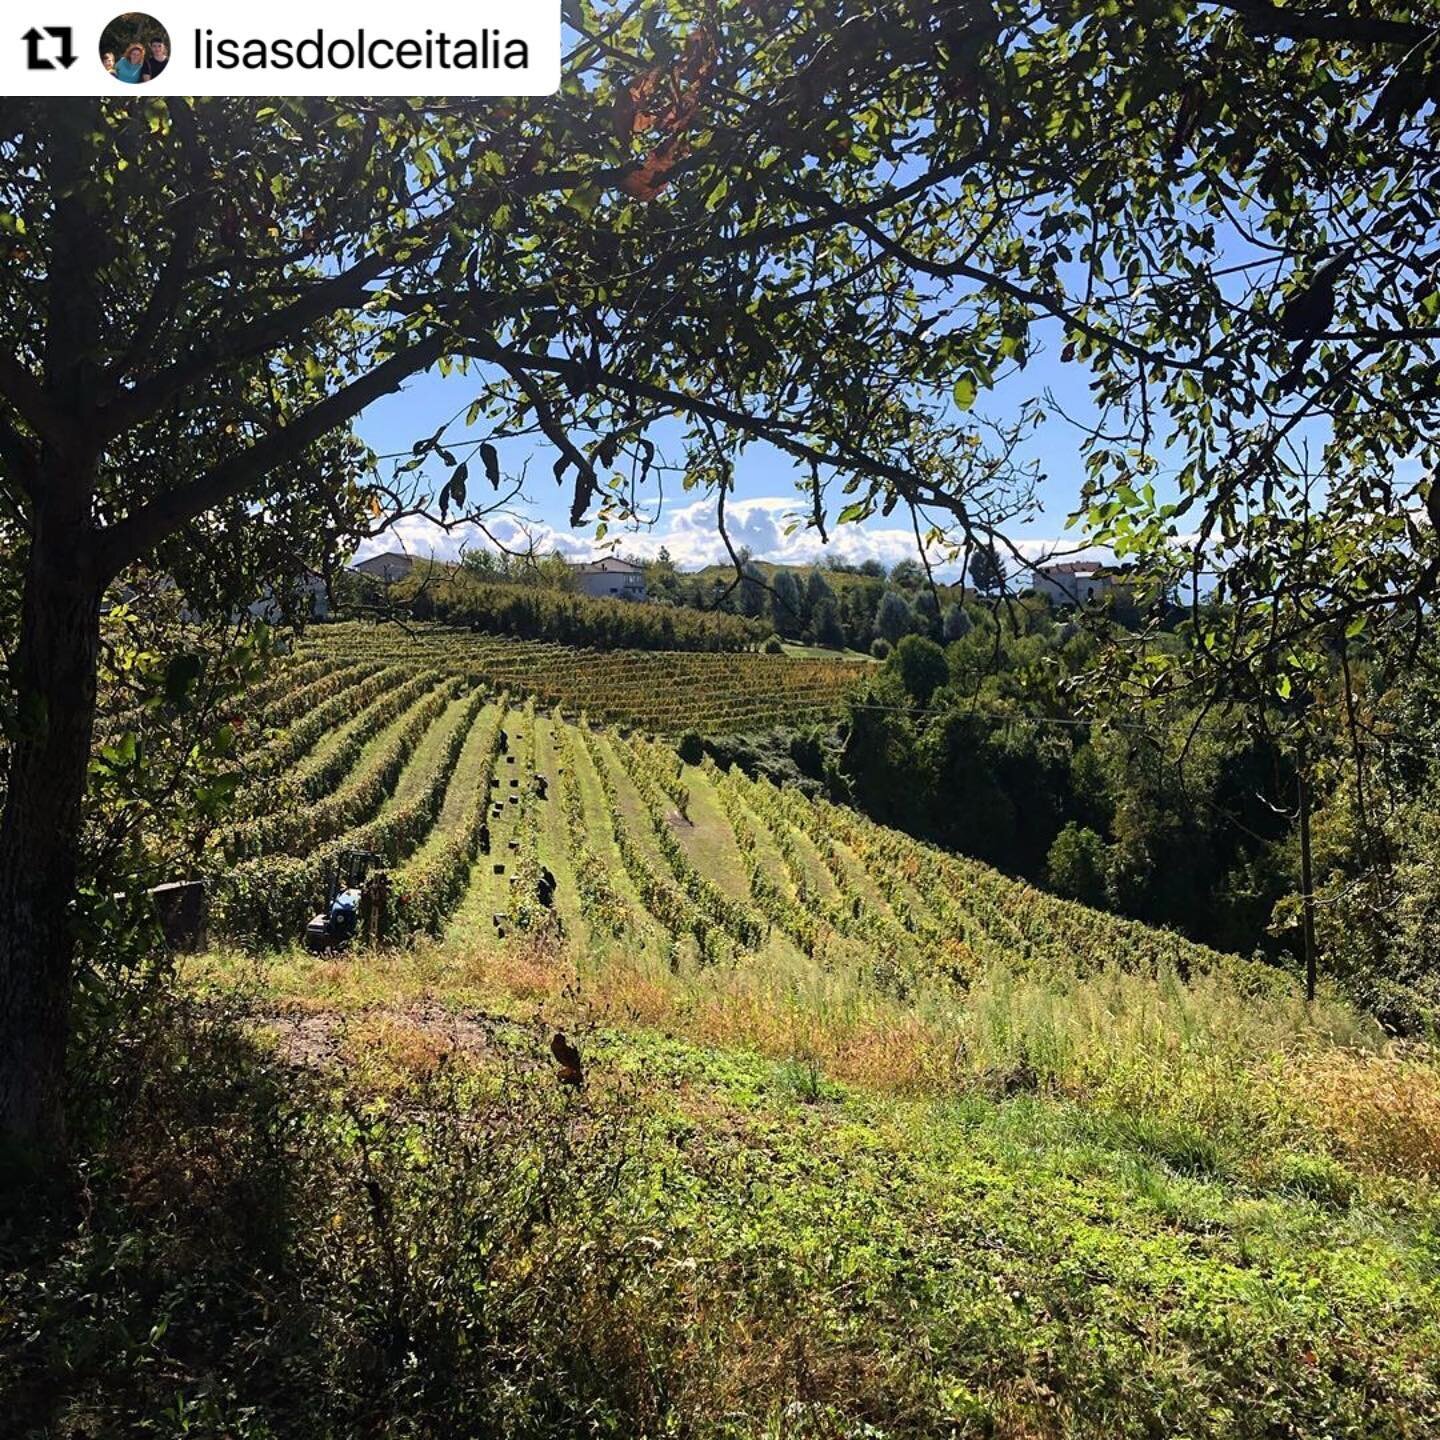 This Sunday we are in Piemonte wine country during harvest time! Clavesana is just outside the Barolo area but known for delicious Dolcetto🍷

Have you ever tasted Dolcetto wine?

#Repost @lisasdolceitalia with @make_repost
・・・
Harvest time...#lisasd